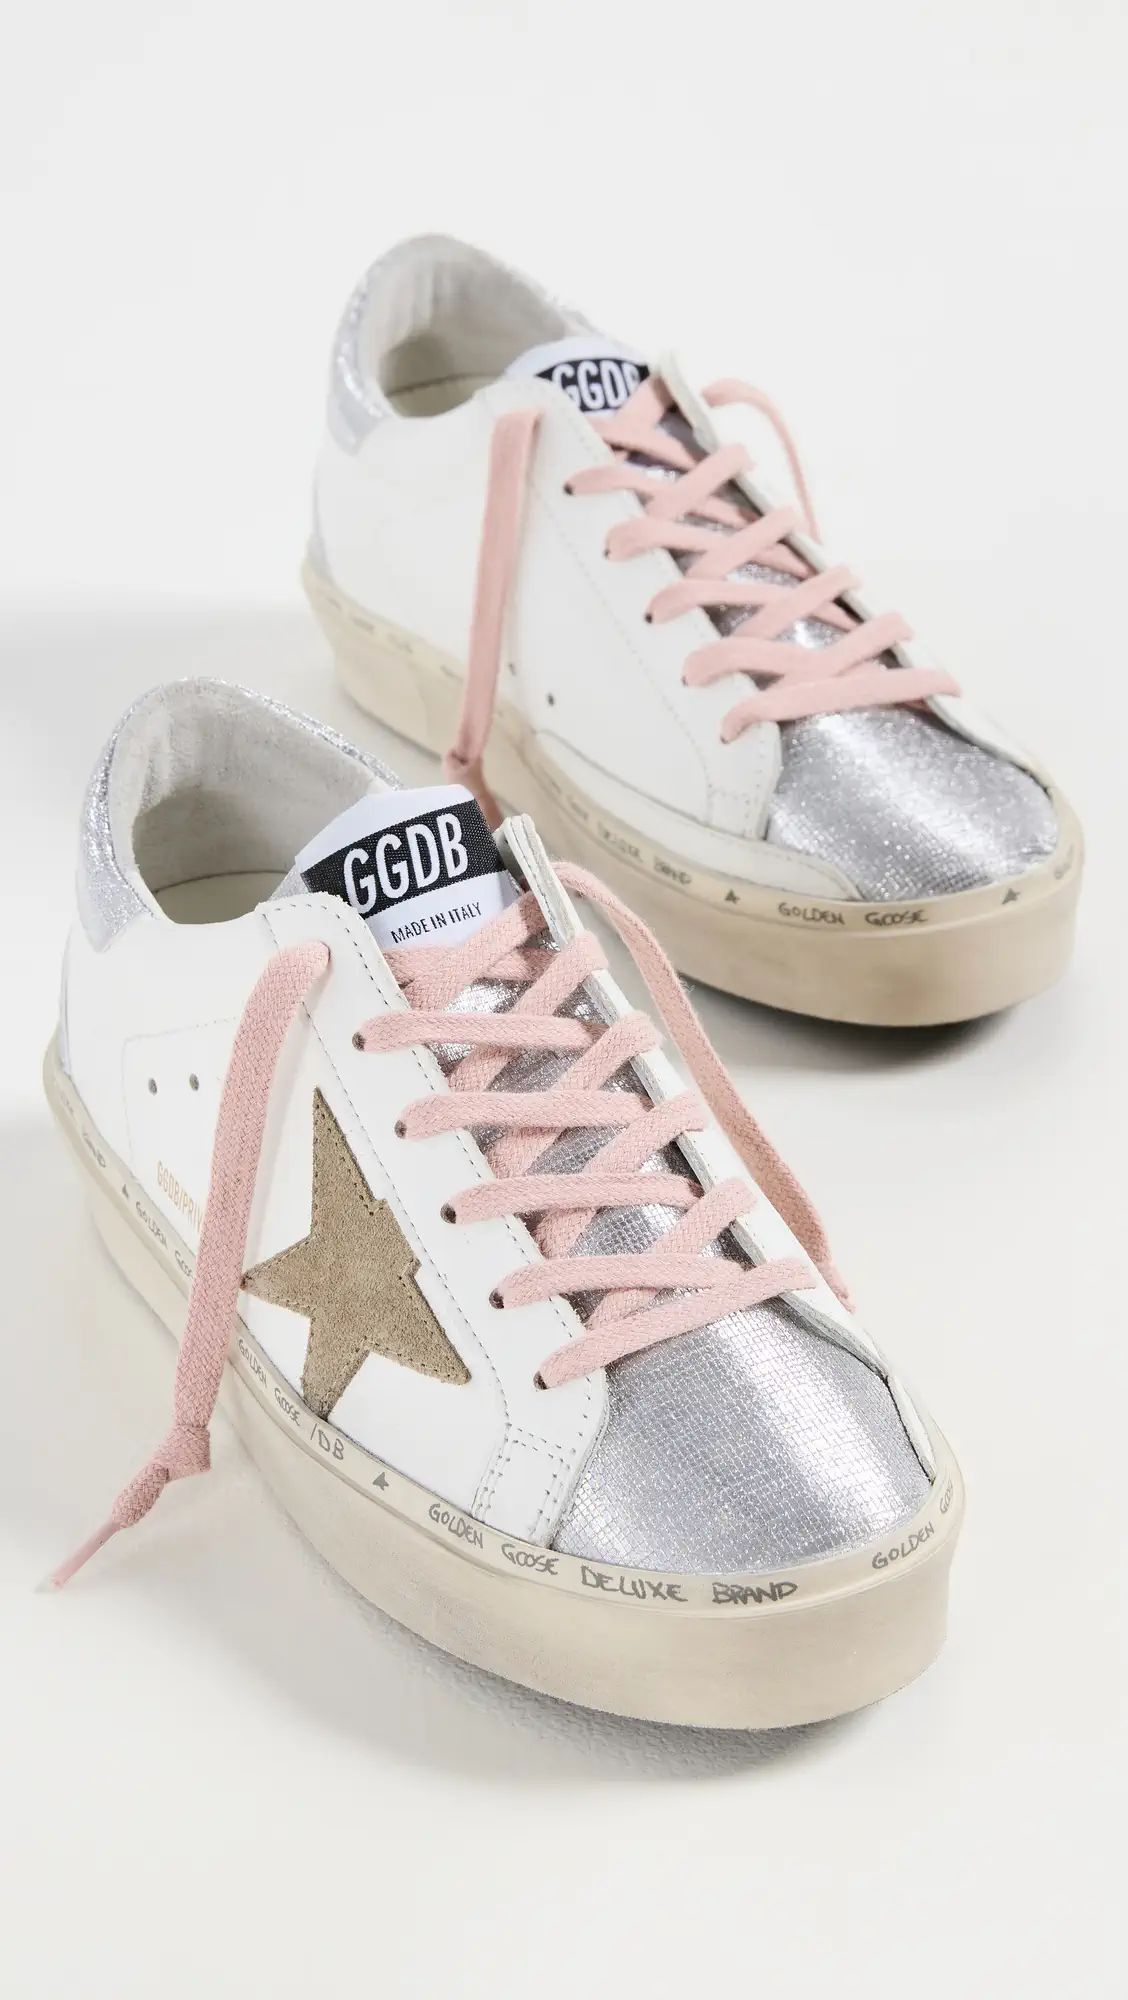 Golden Goose Hi Star Classic Sneakers with Spur Glitter Toe | Shopbop | Shopbop